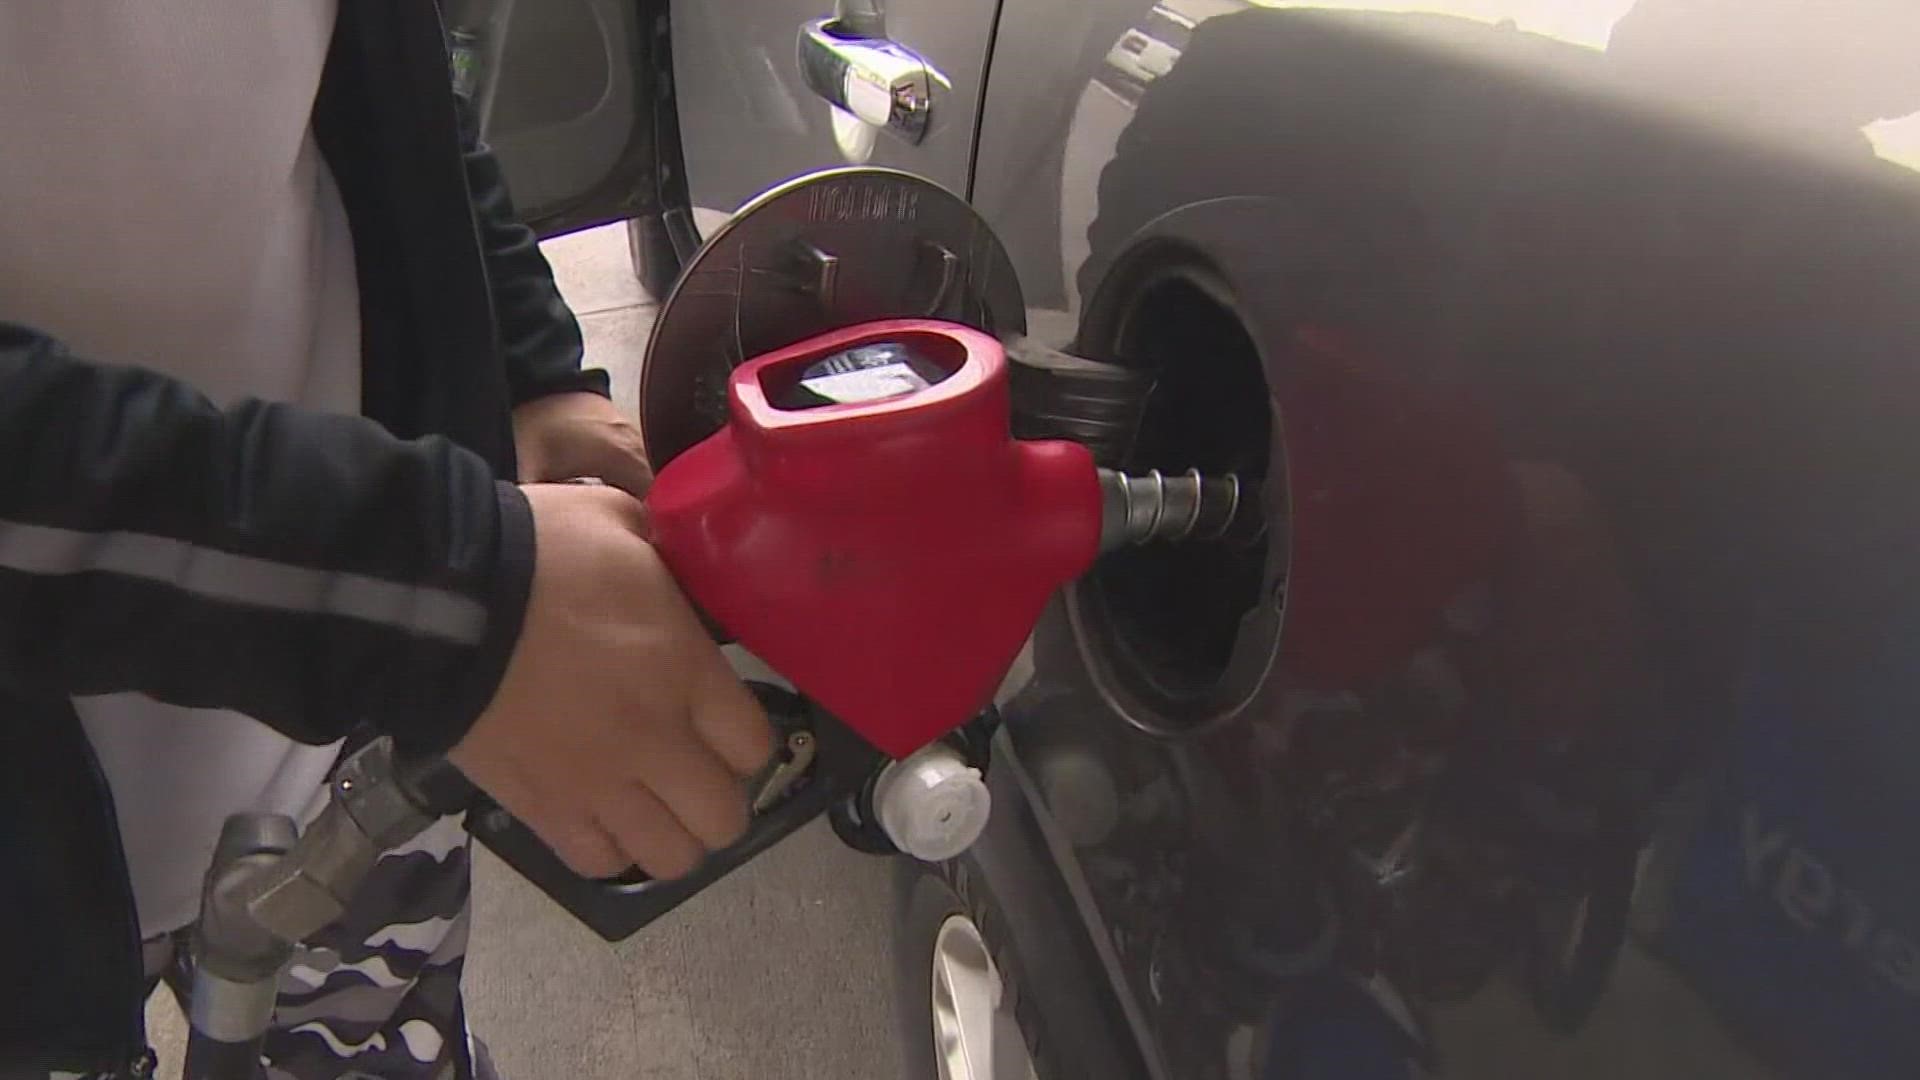 Houston-area experts warn both gas and food prices could rise if the conflict between Russia and Ukraine escalates.